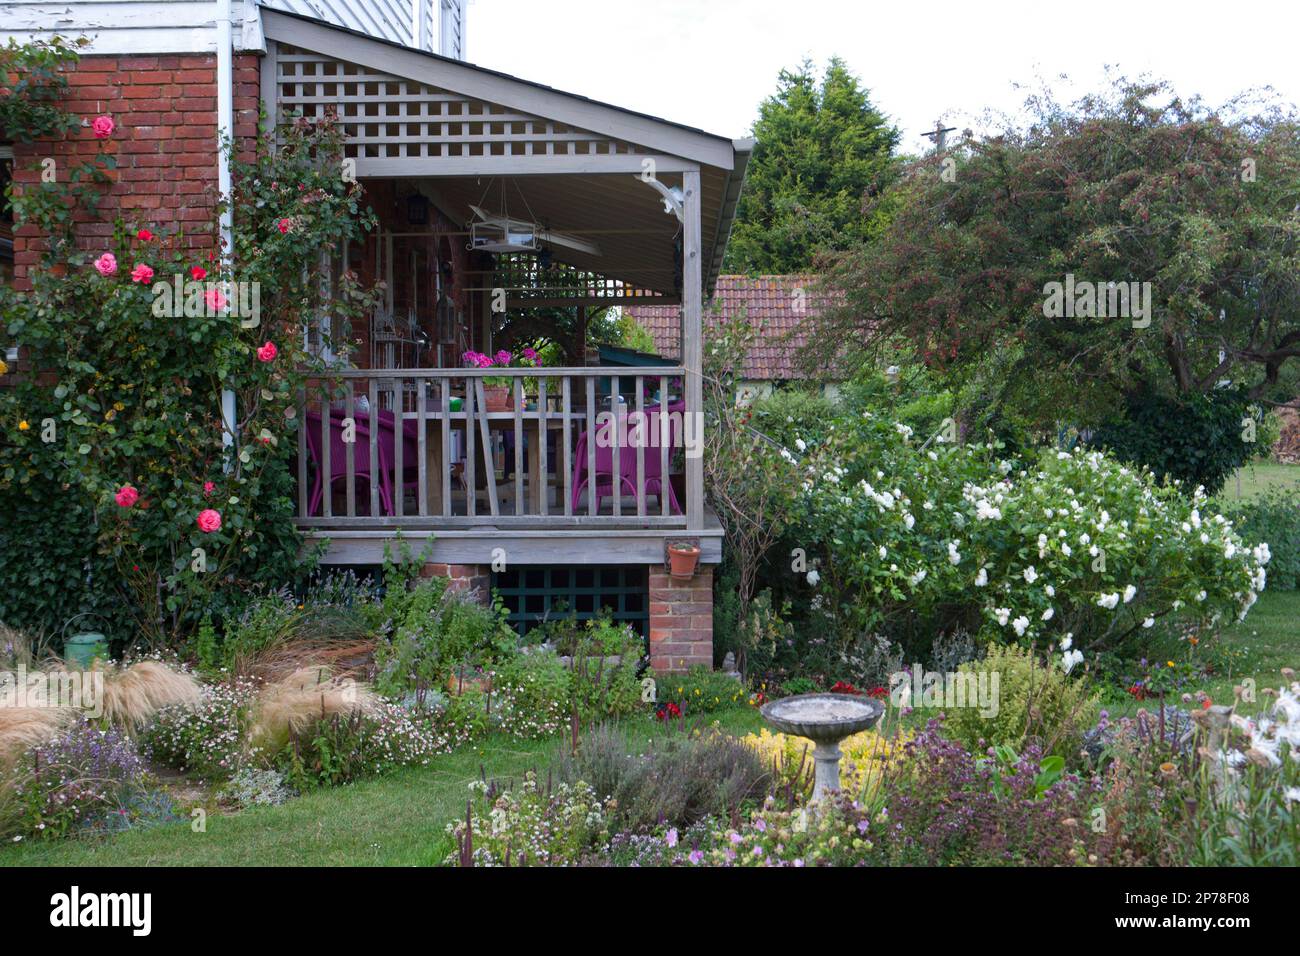 Raised wooden decking area with outdoor seating, surrounded by climbing roses Stock Photo